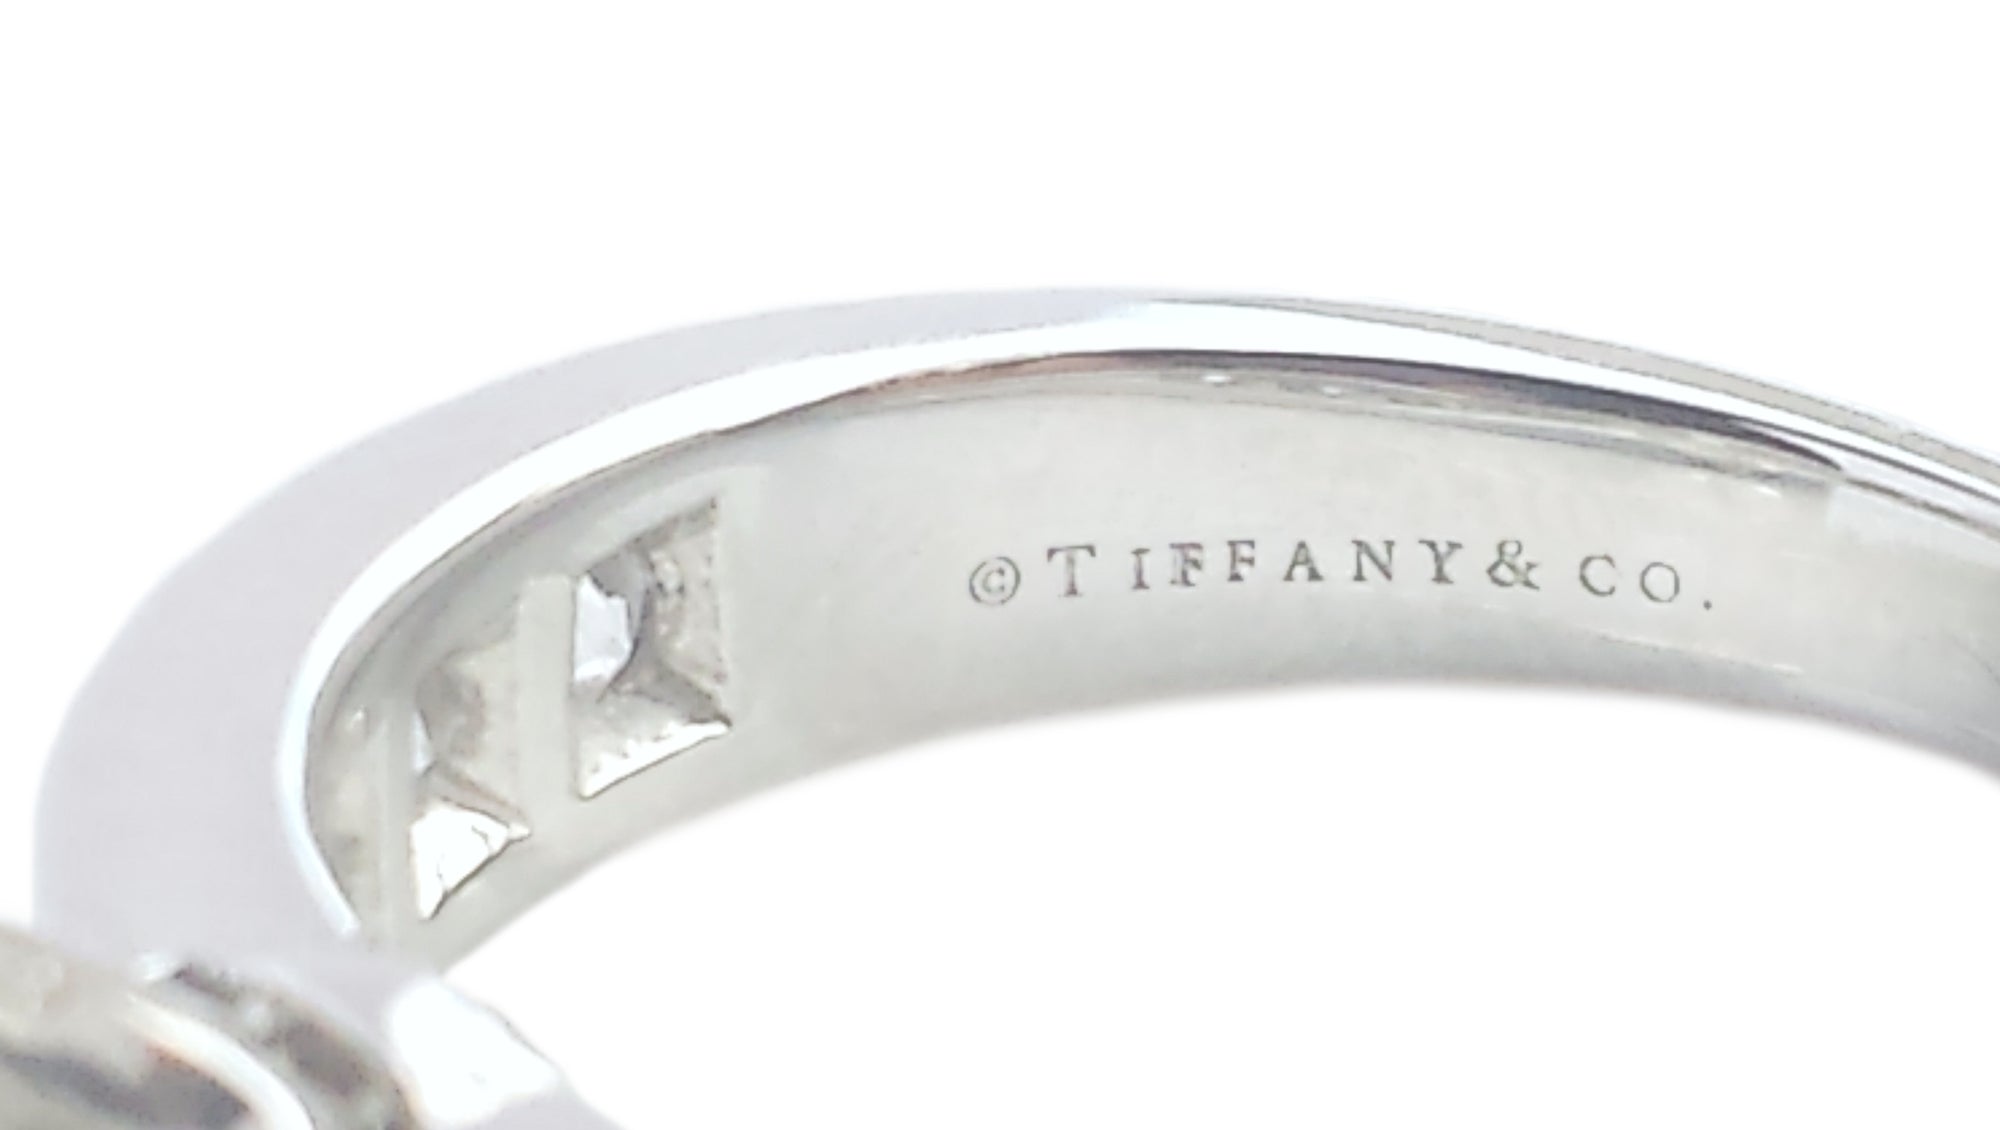 Tiffany & Co. 2.84tcw I/VVS2 Round Brilliant Diamond Engagement Ring with Side Stones